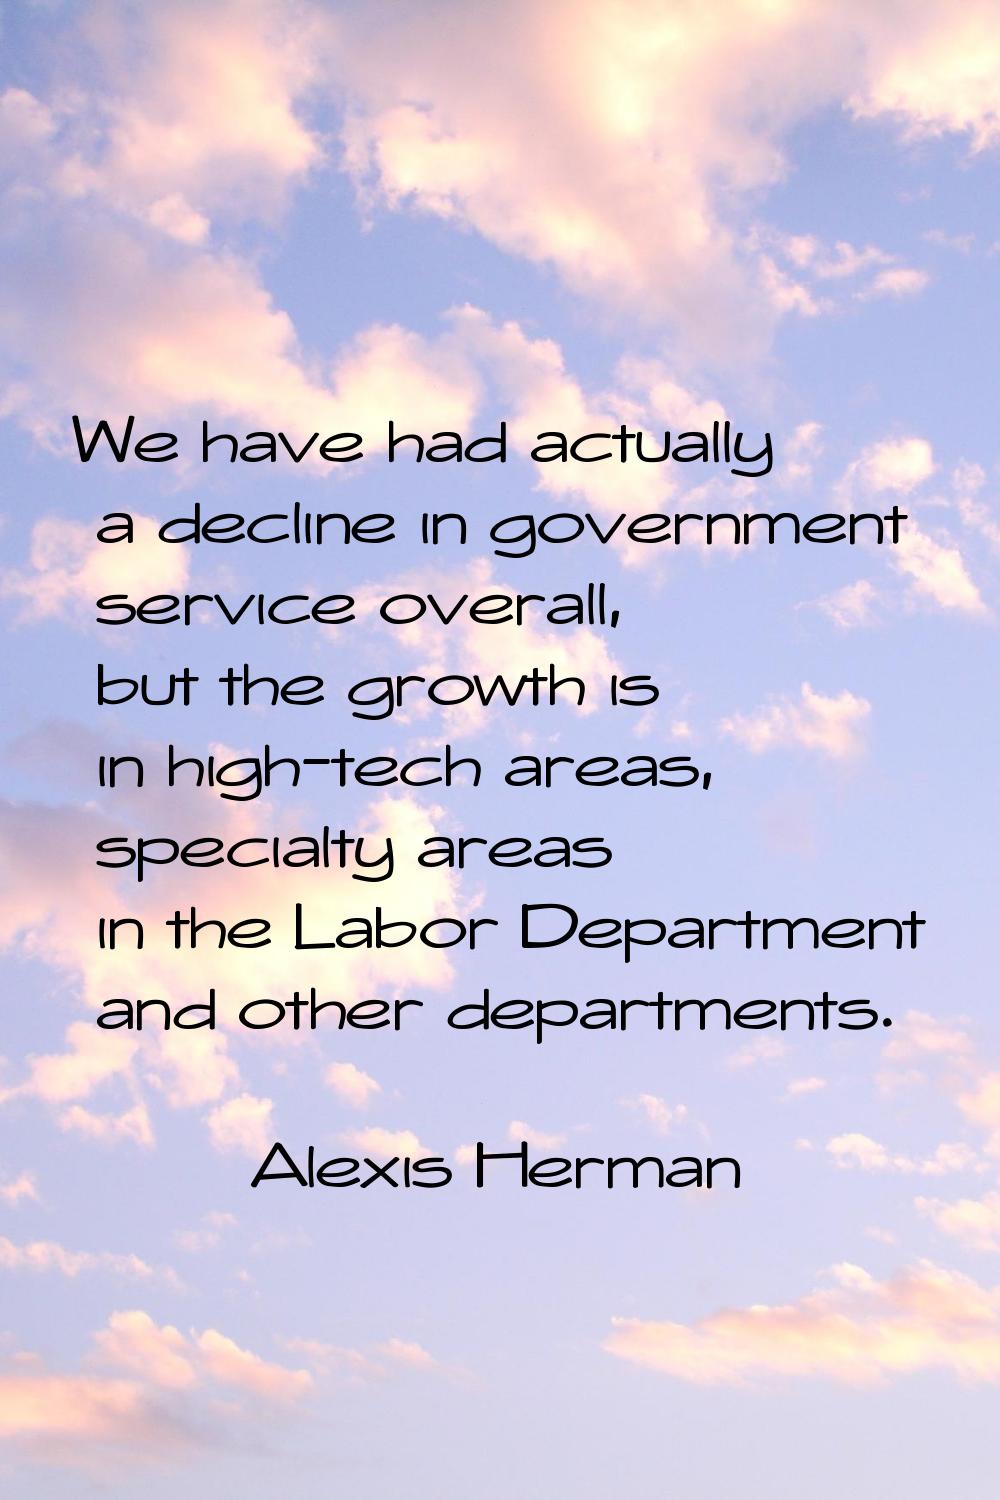 We have had actually a decline in government service overall, but the growth is in high-tech areas,